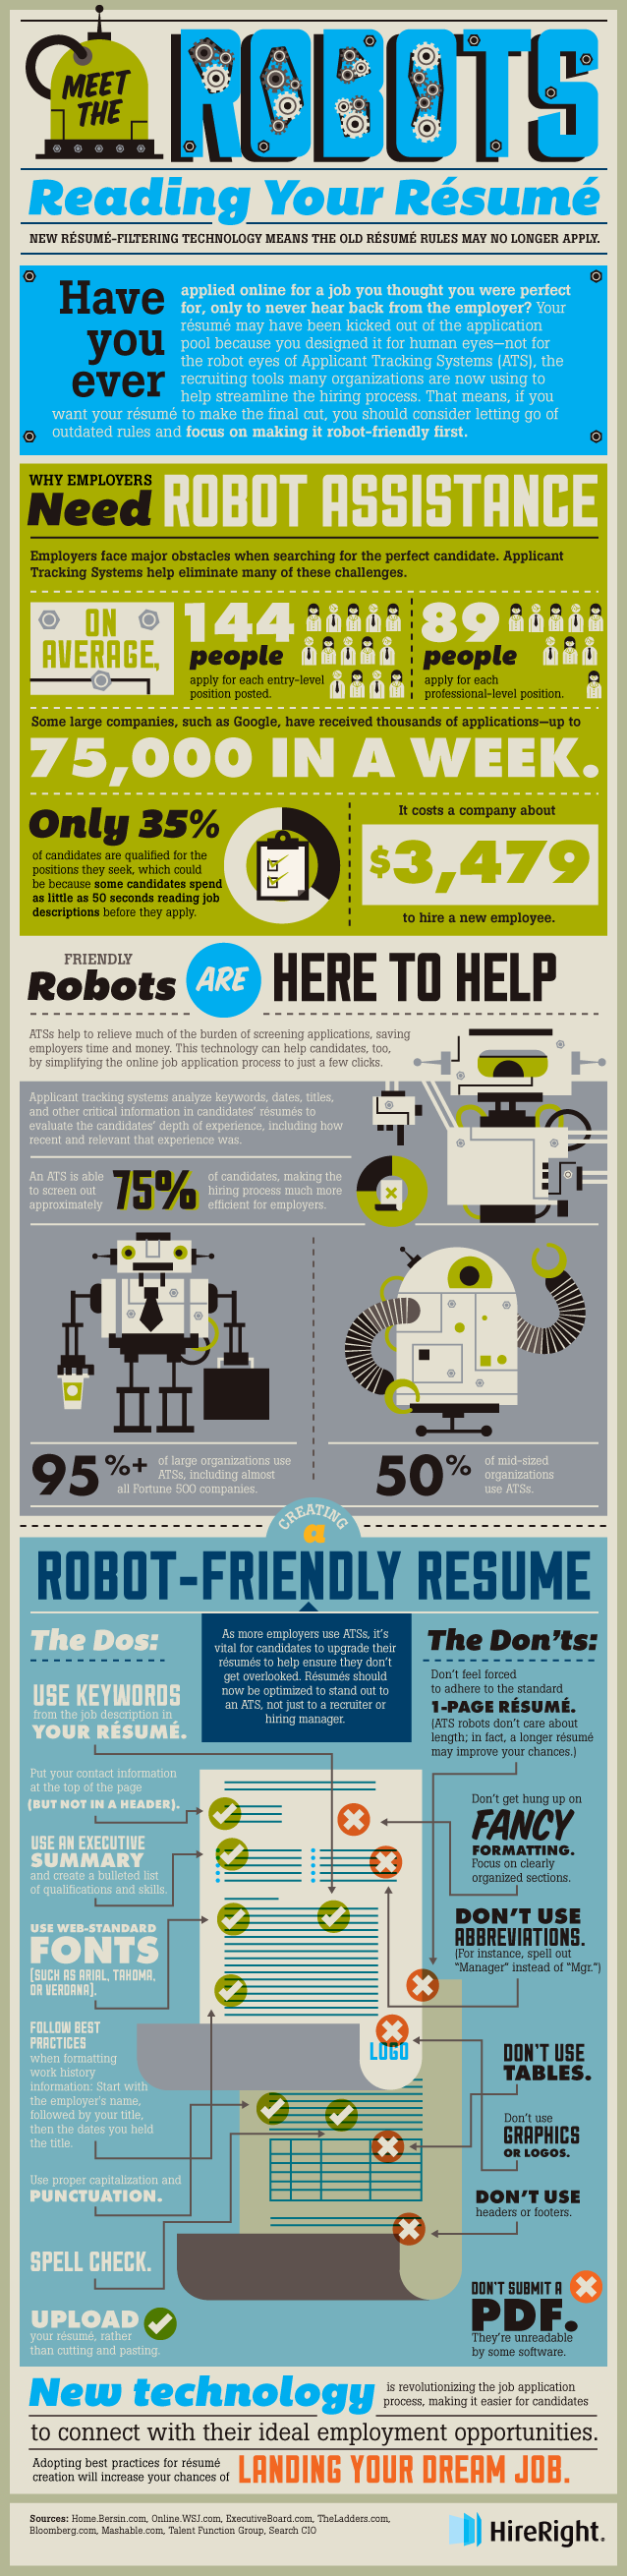 Robot Resume Infographic from Mashable.com 